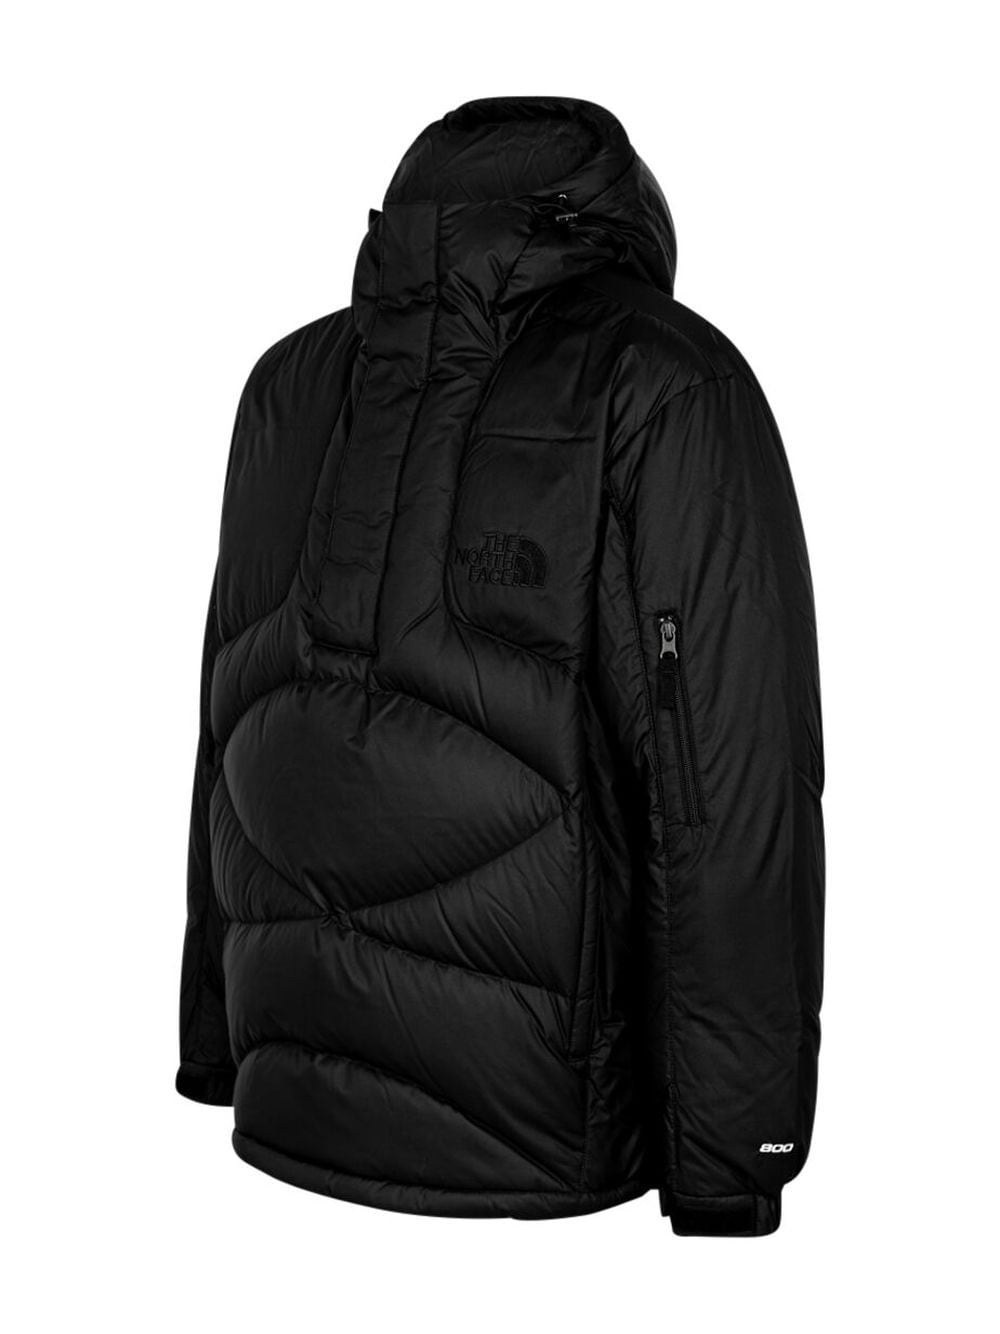 x The North Face 800-Fill pullover jacket - 3